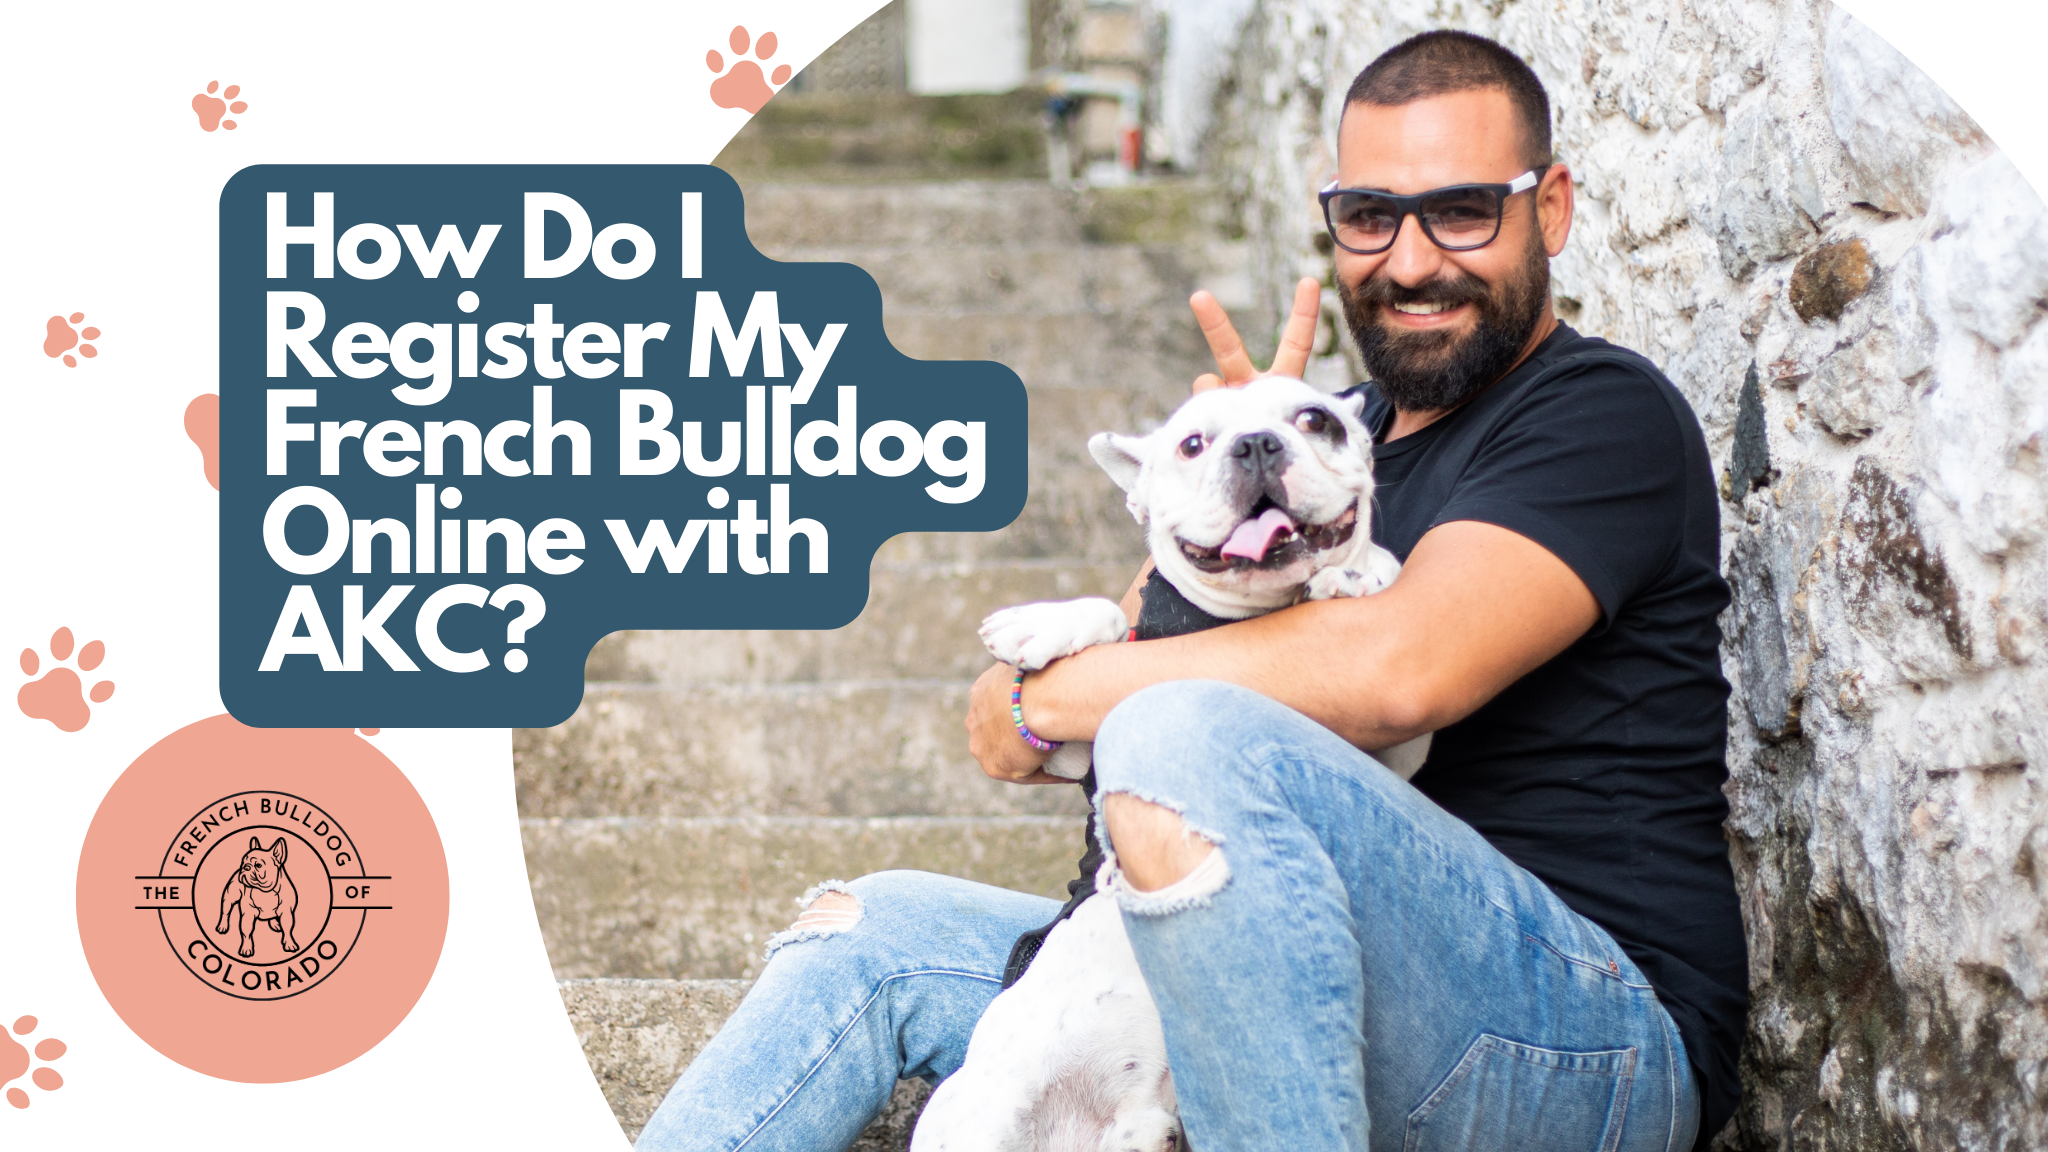 How Do I Register My French Bulldog Online with AKC? The French Bulldog of Colorado Blog